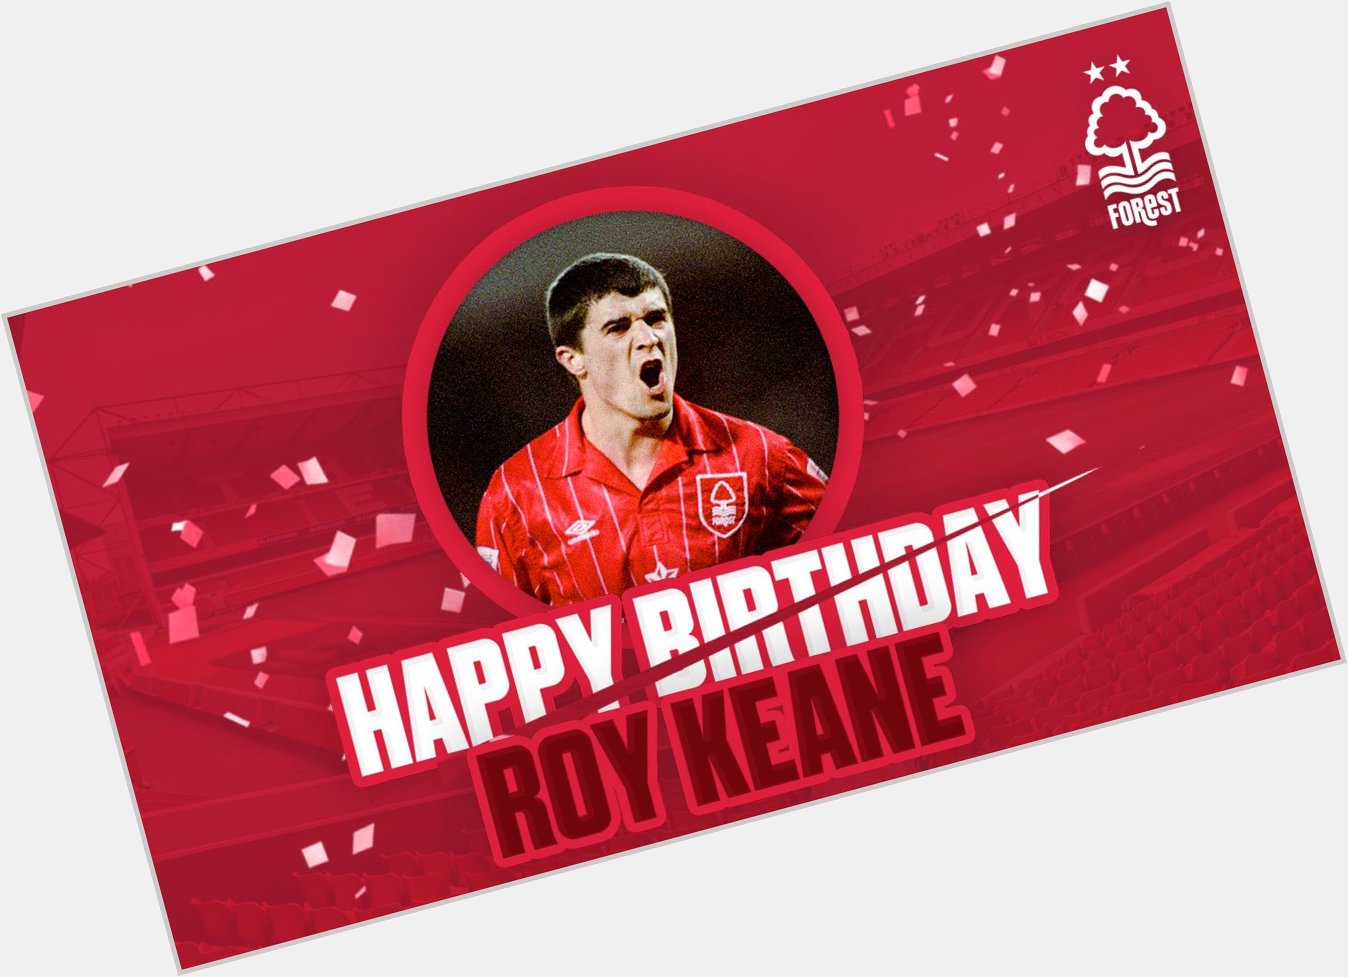  Happy birthday to the one and only Roy Keane.  